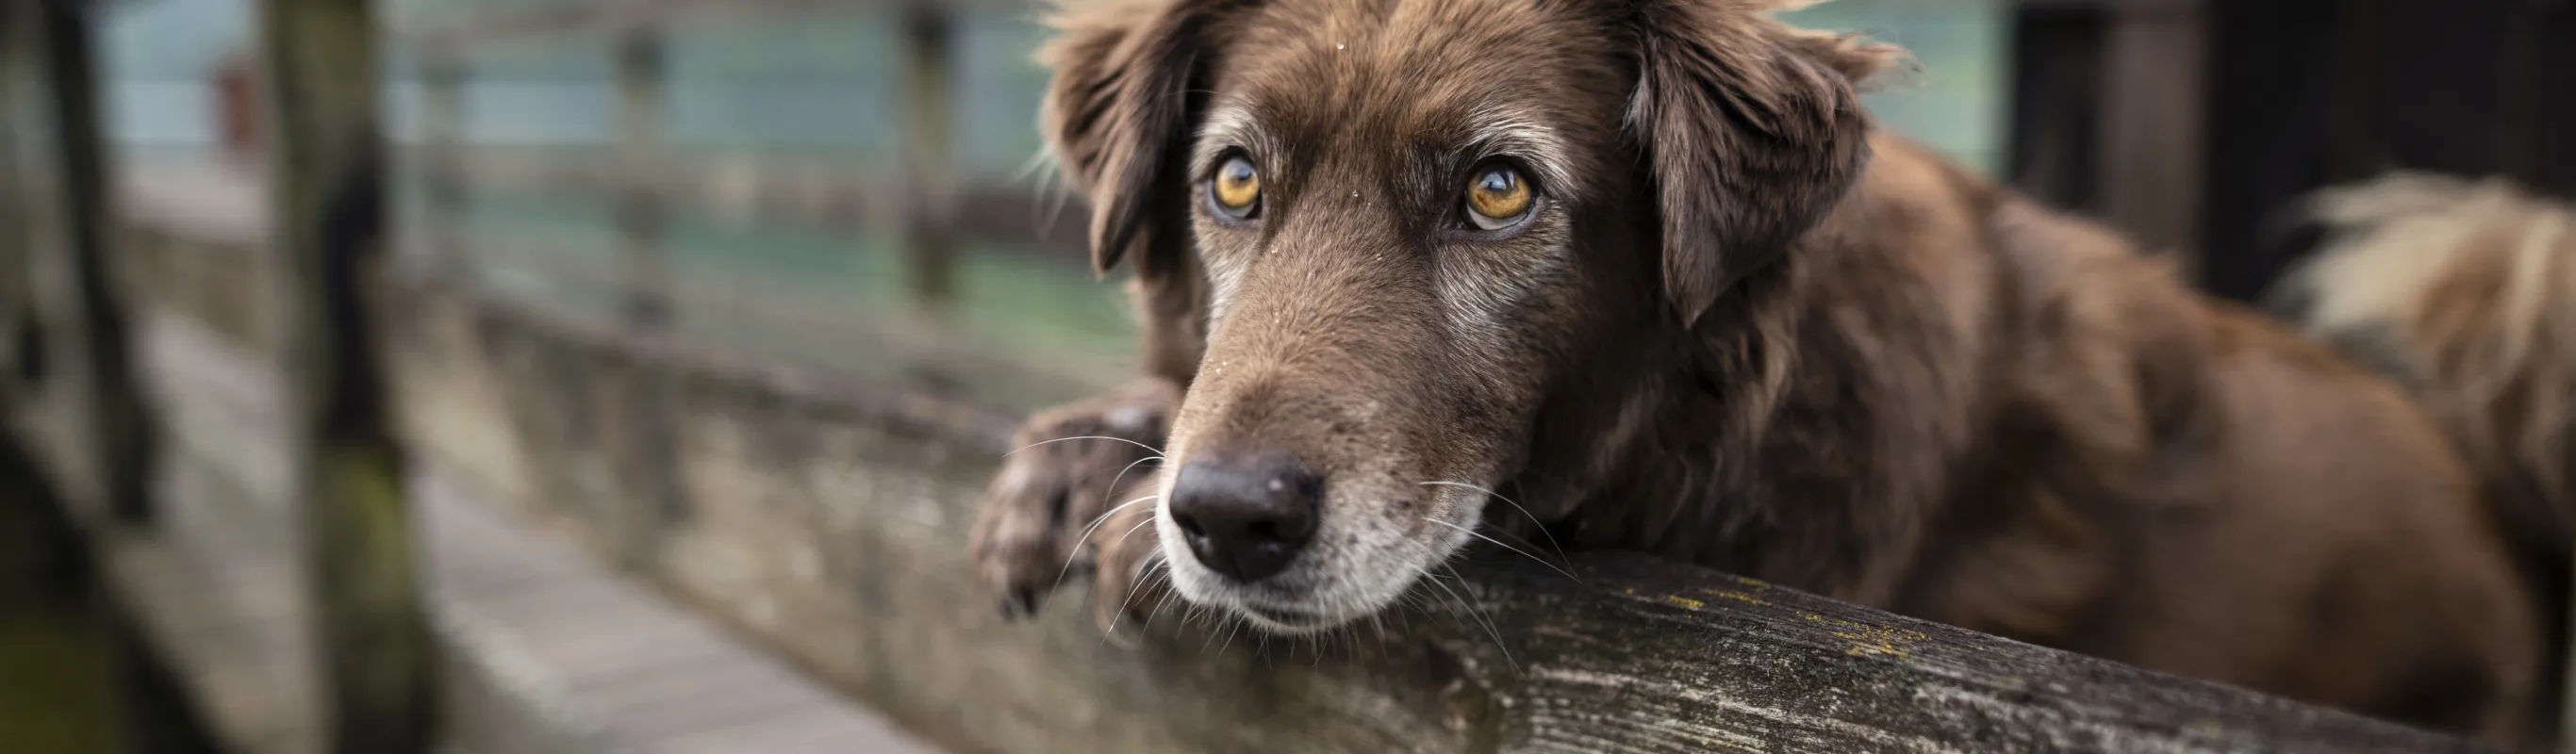 Older dog leaning with paw on wood fence